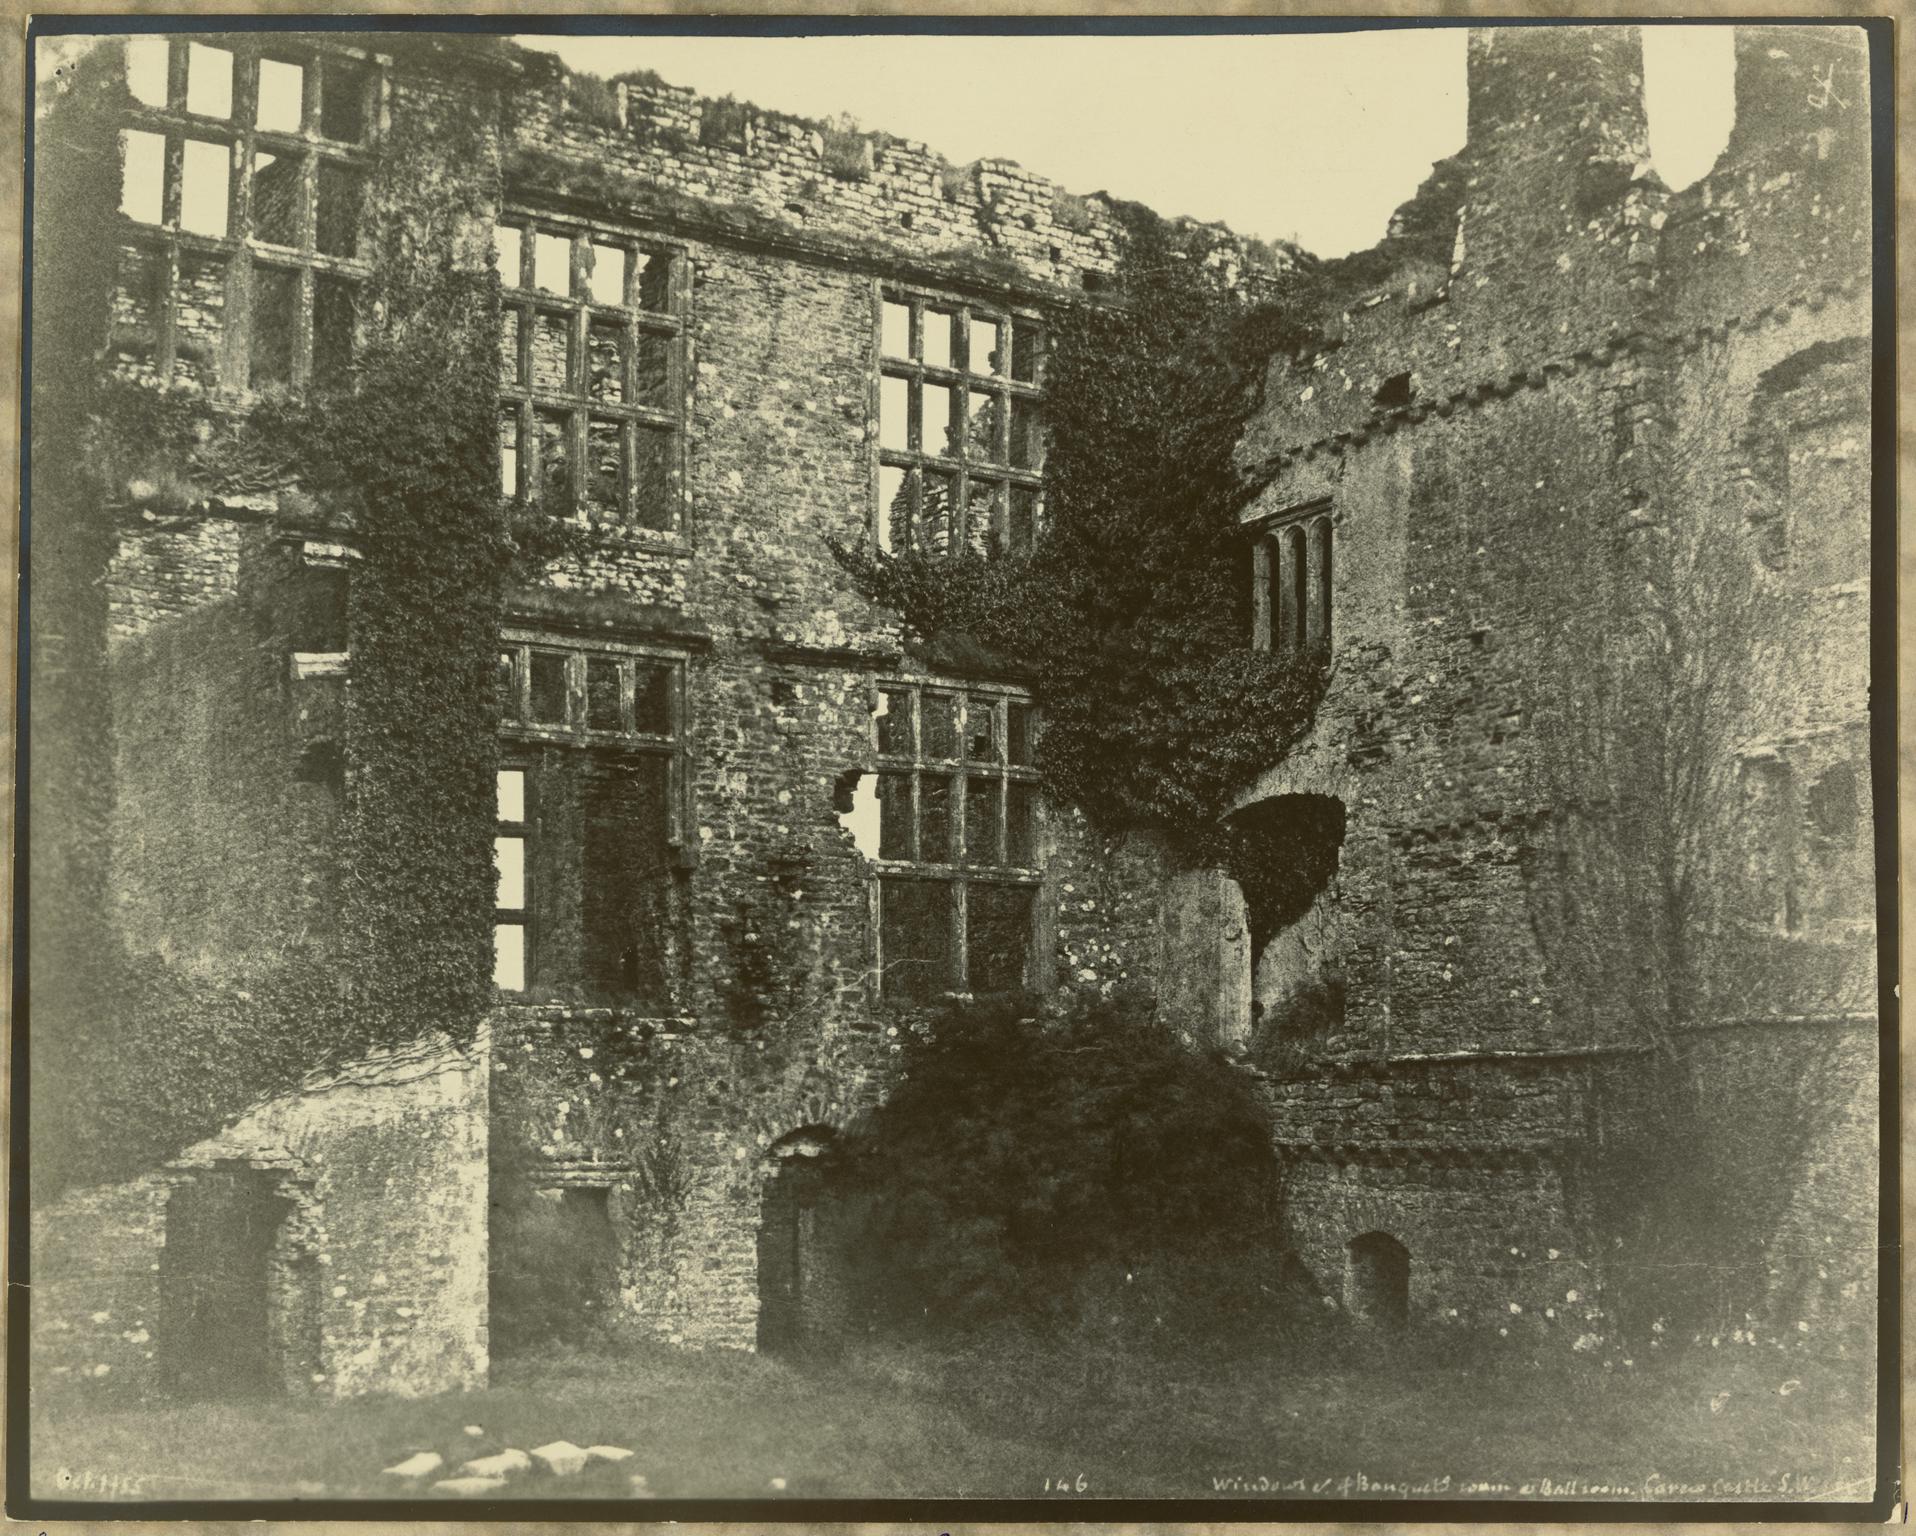 Windows of Banquets room and Ballroom, Carew Castle, S.W.